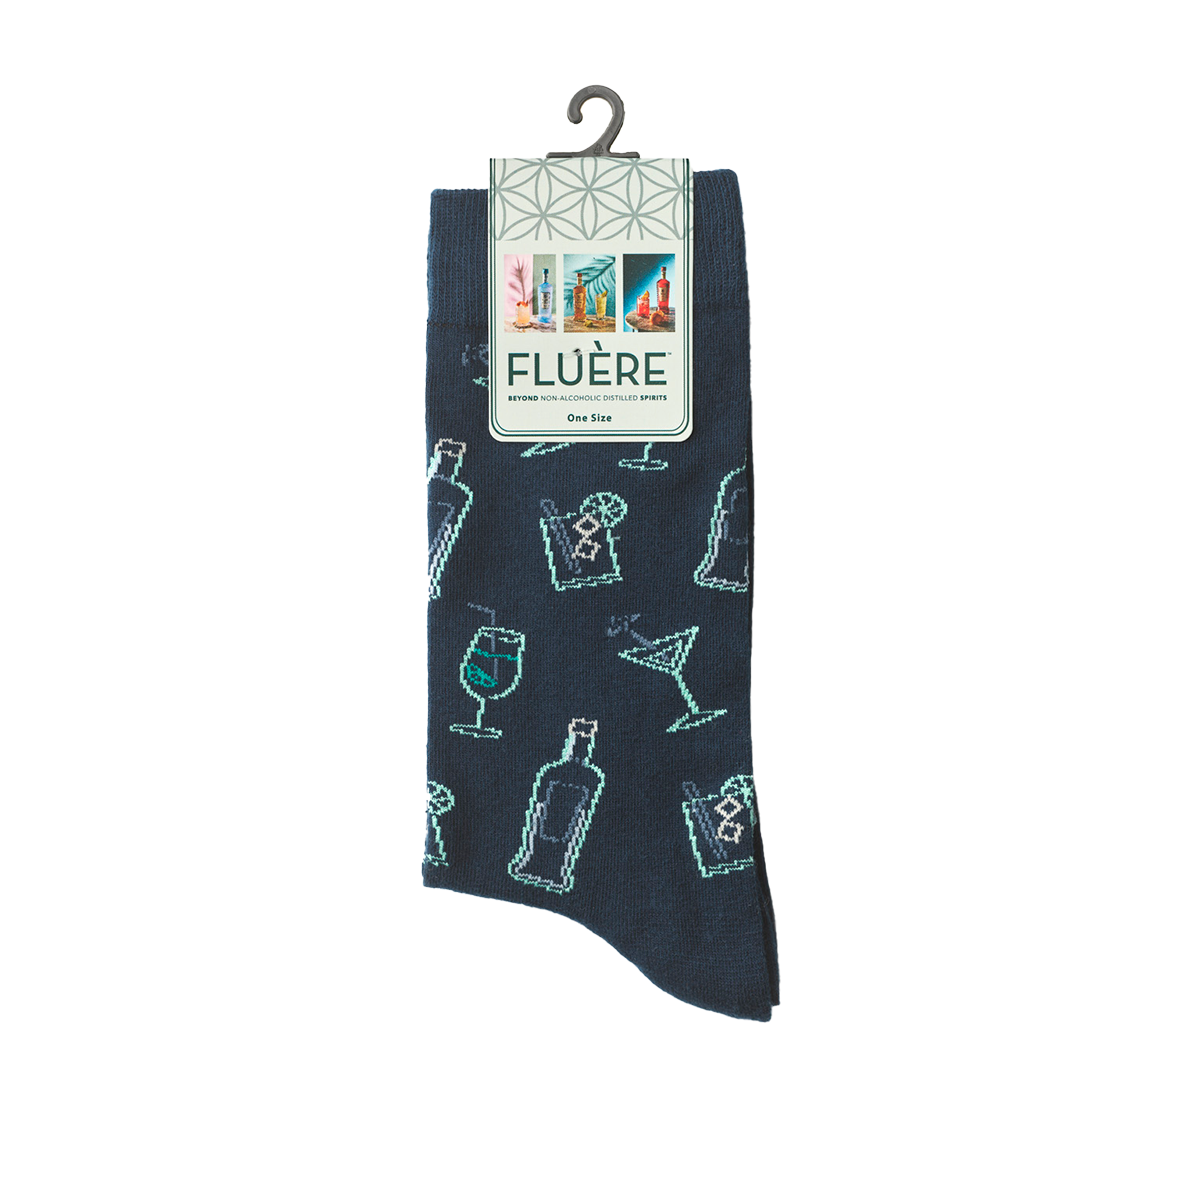 Fluère Cocktail Socks “ One size” fits all